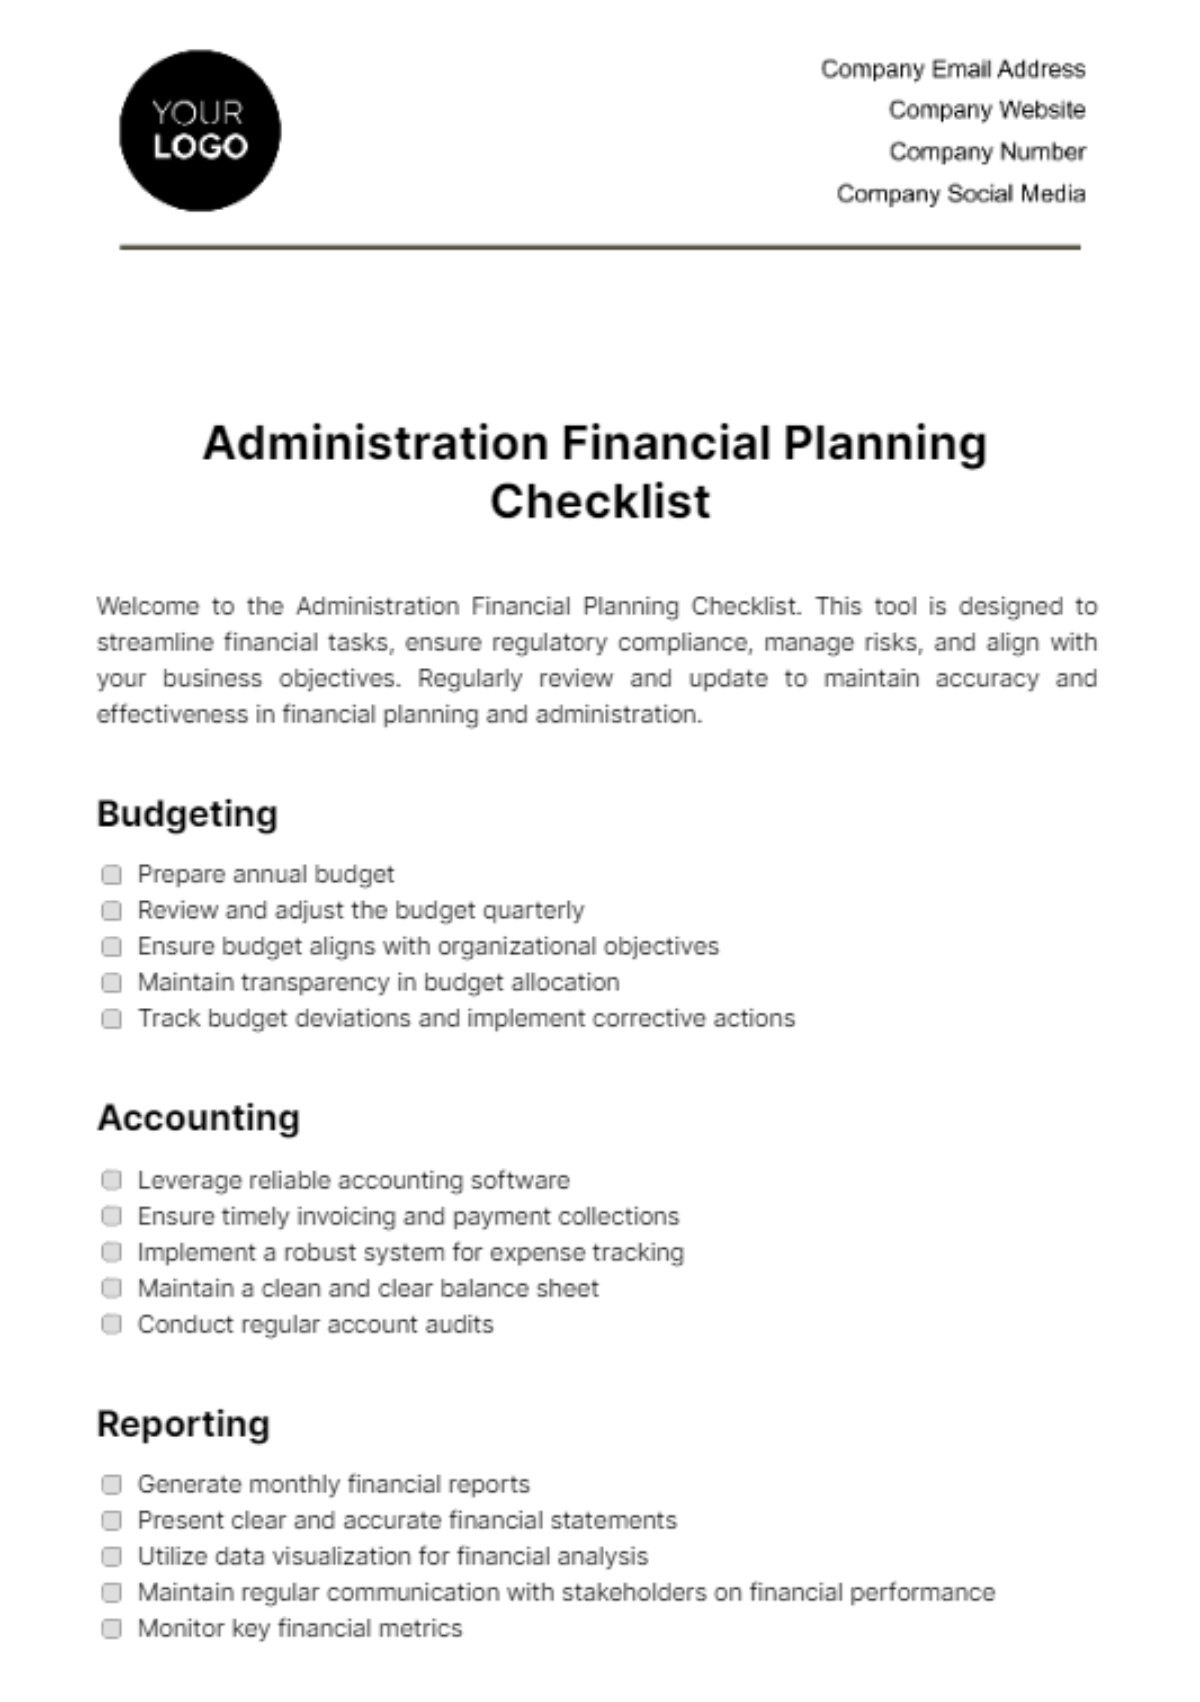 Administration Financial Planning Checklist Template